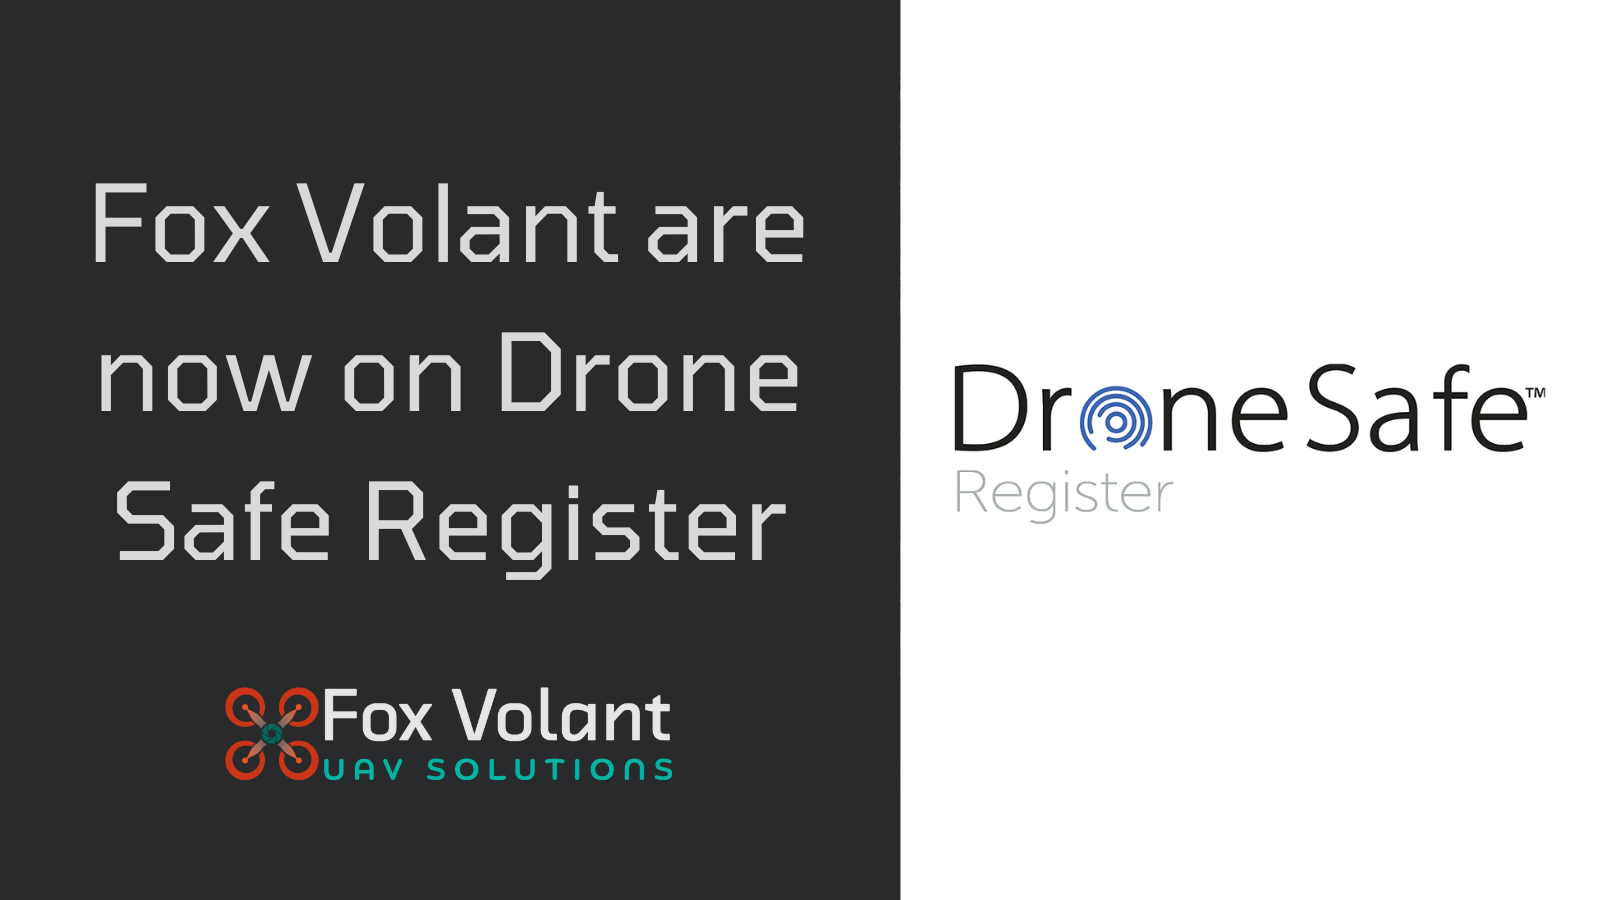 Fox Volant are now on Drone Safe Register - Fox Volant UAV Solutions